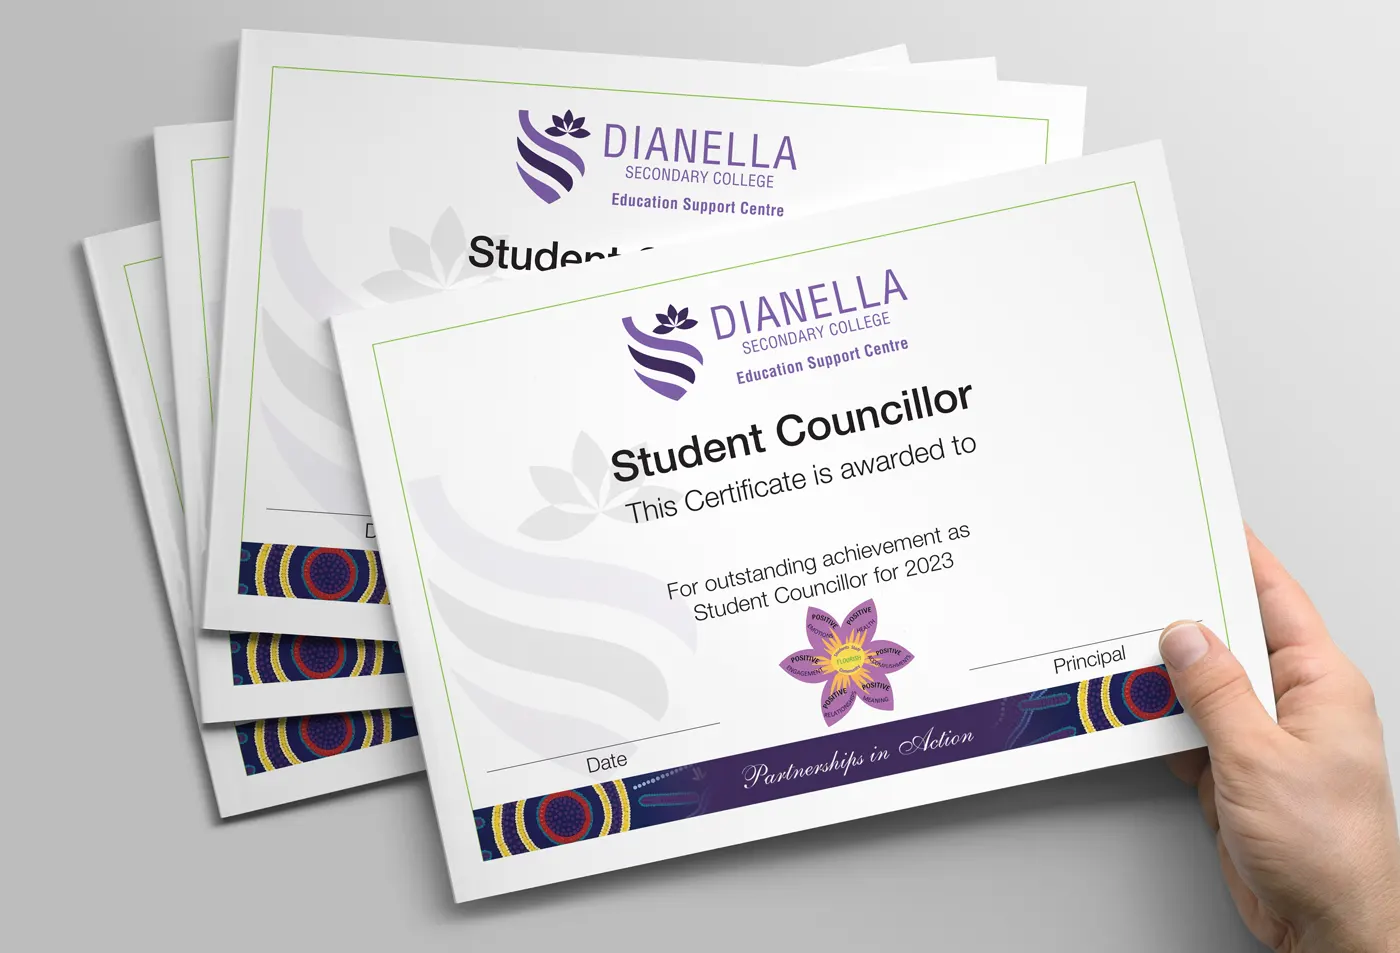 Dianella Secondary College Education Support Website